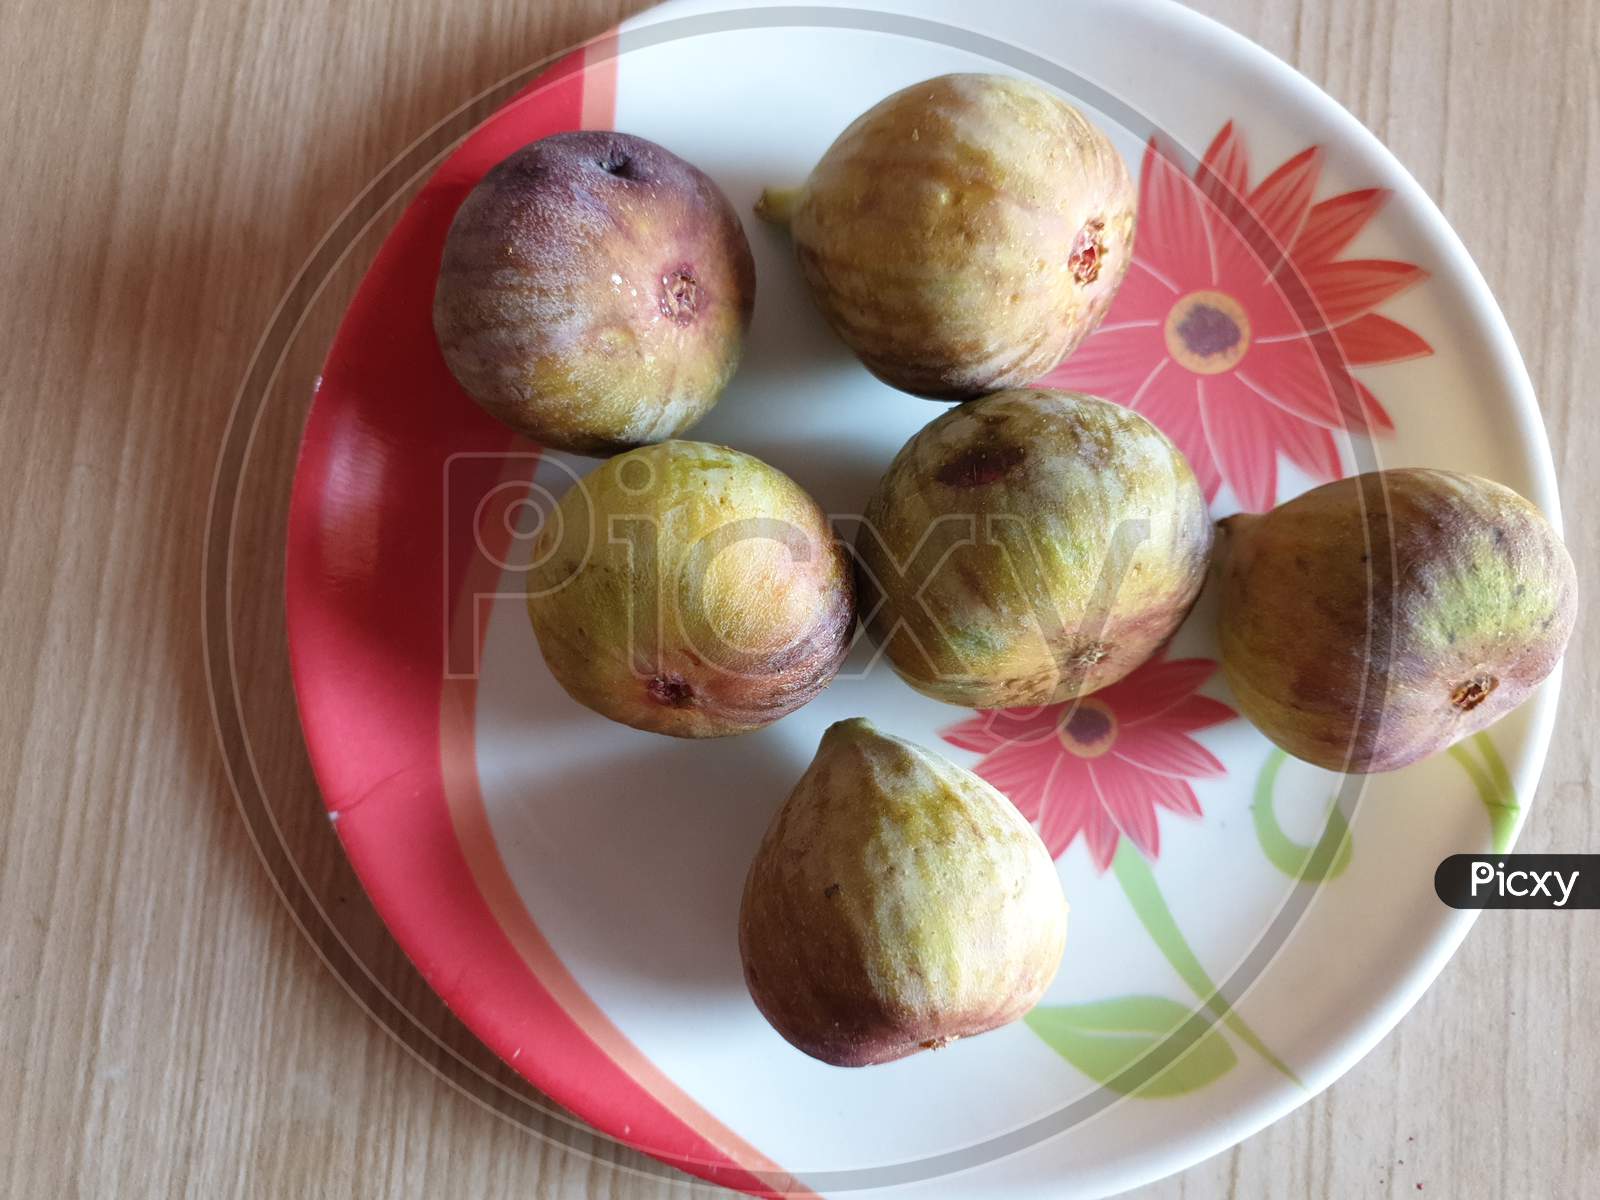 These are figs